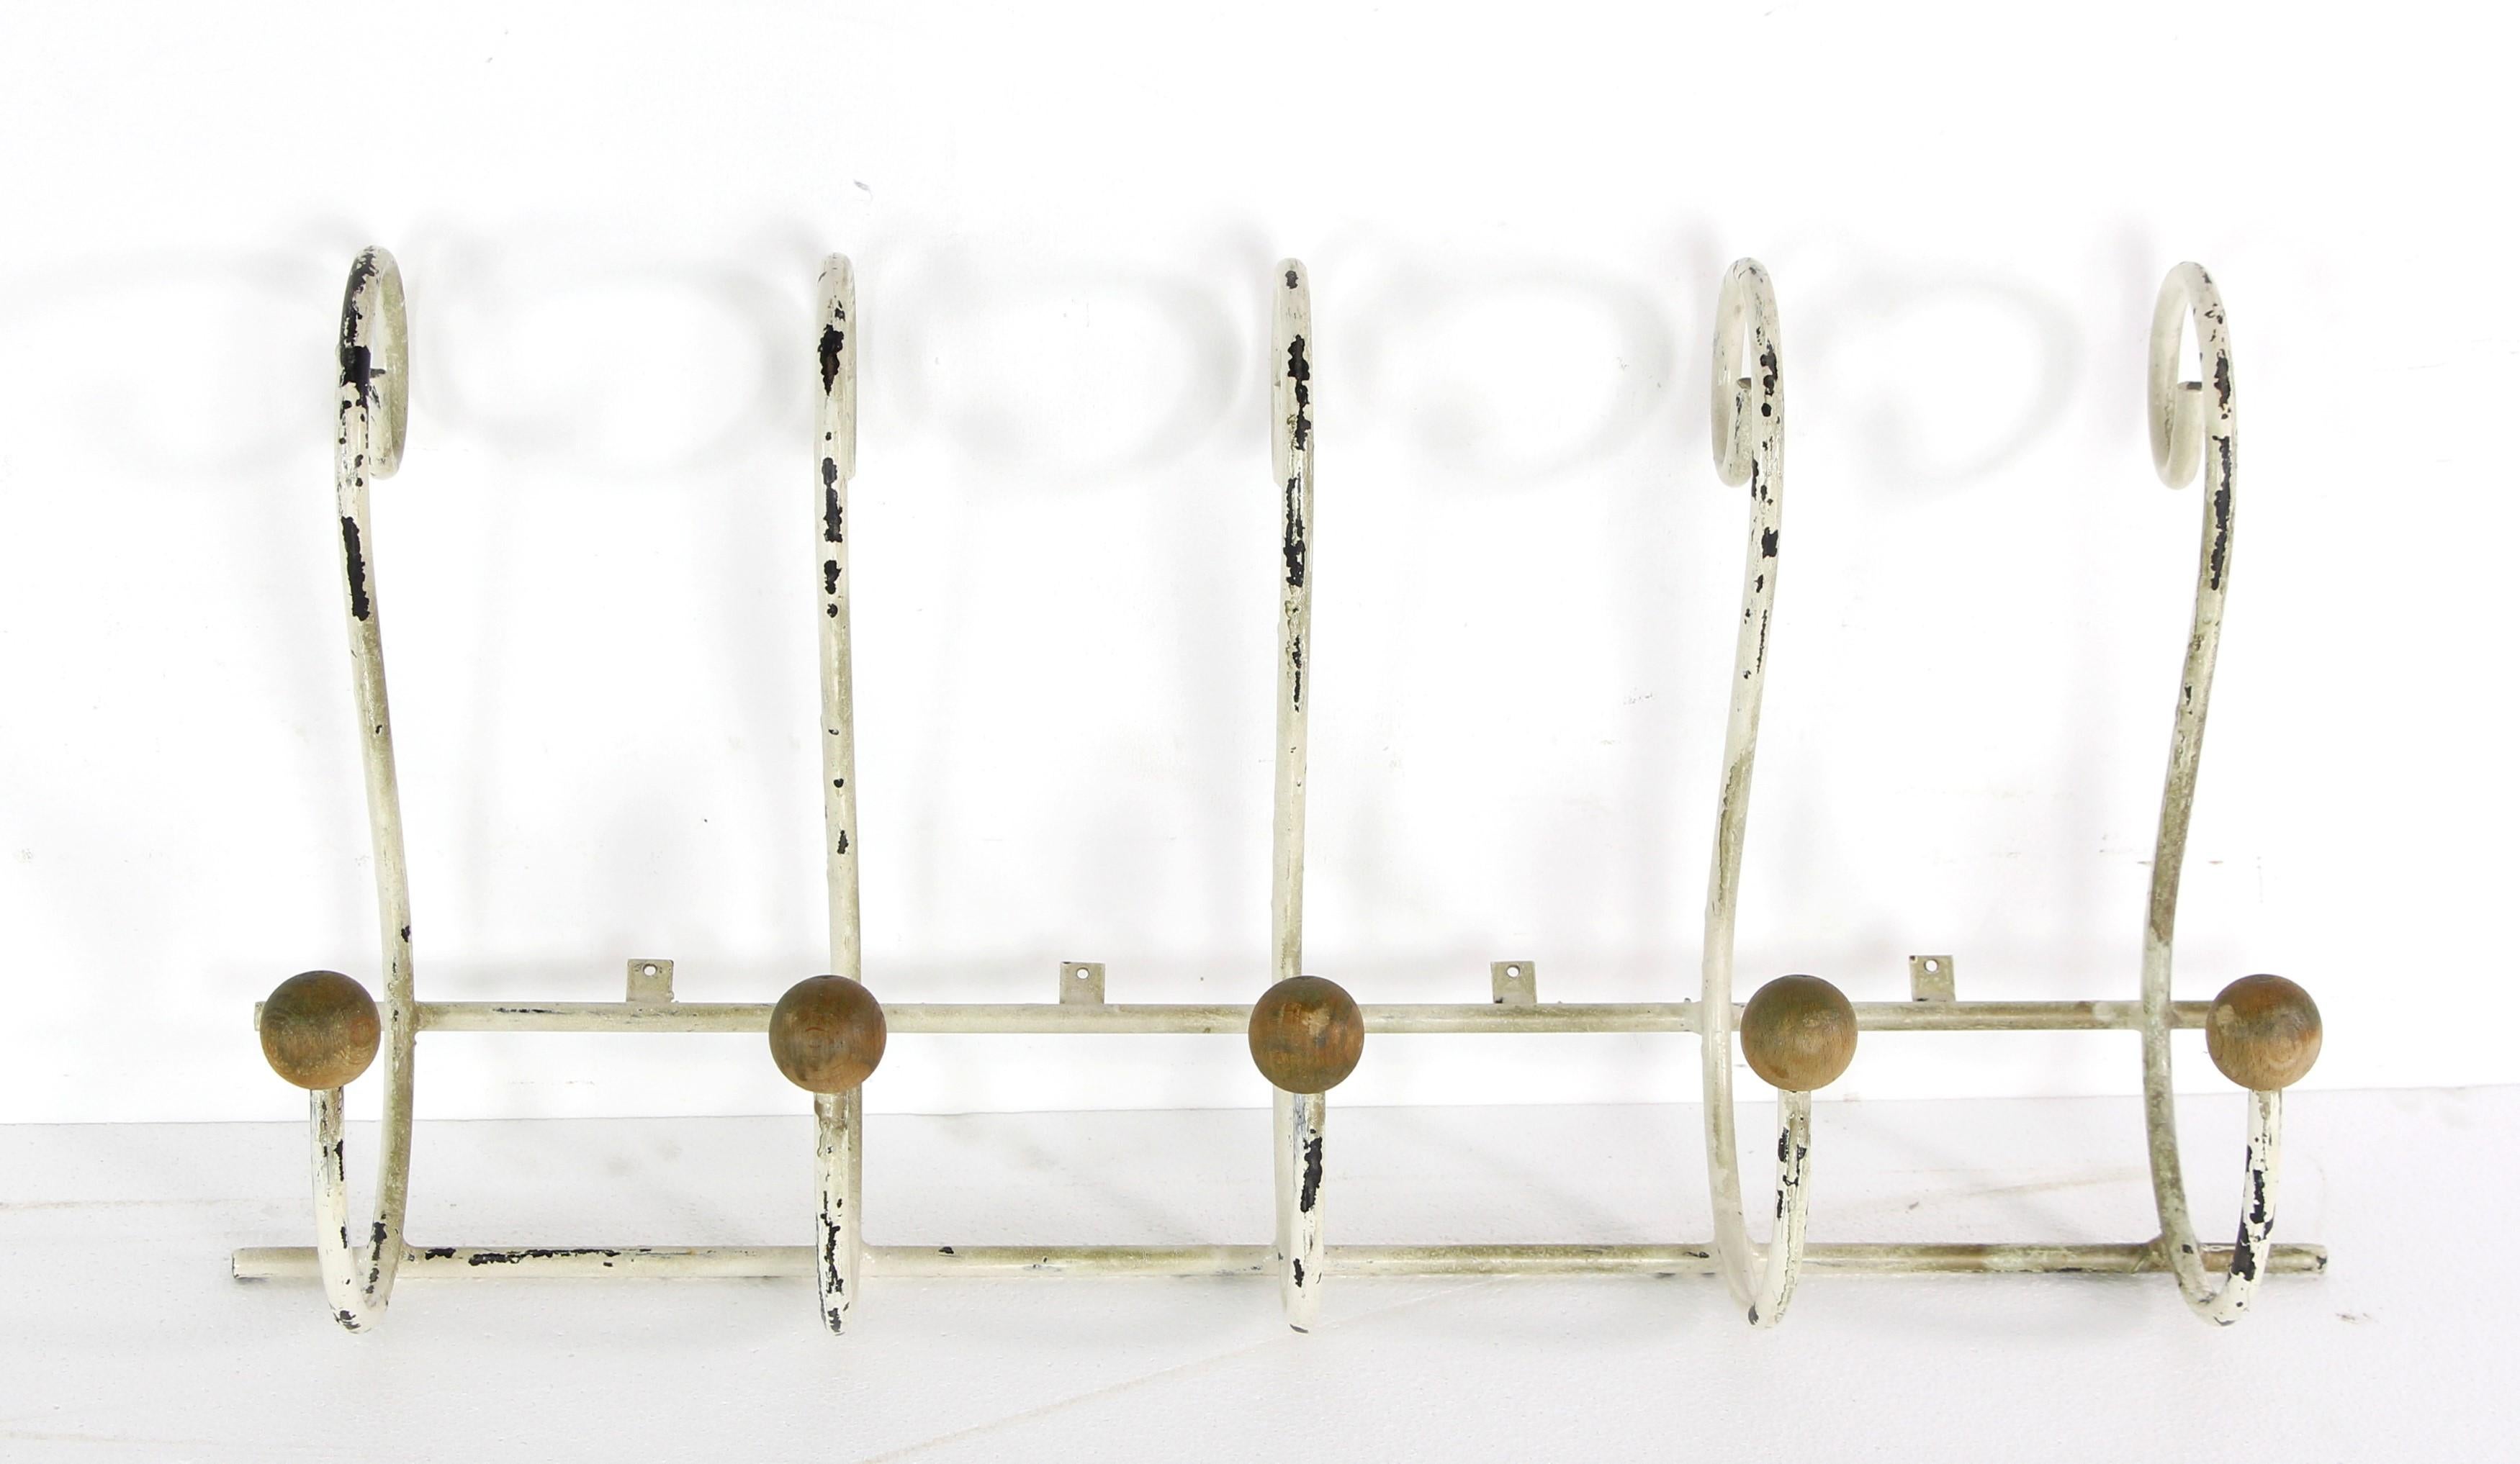 This European style white painted distressed steel wall rack features five double arm hooks, with wooden balls attached to the bottom hooks. This piece offers a rustic and charming storage solution, blending functionality with decorative accents for